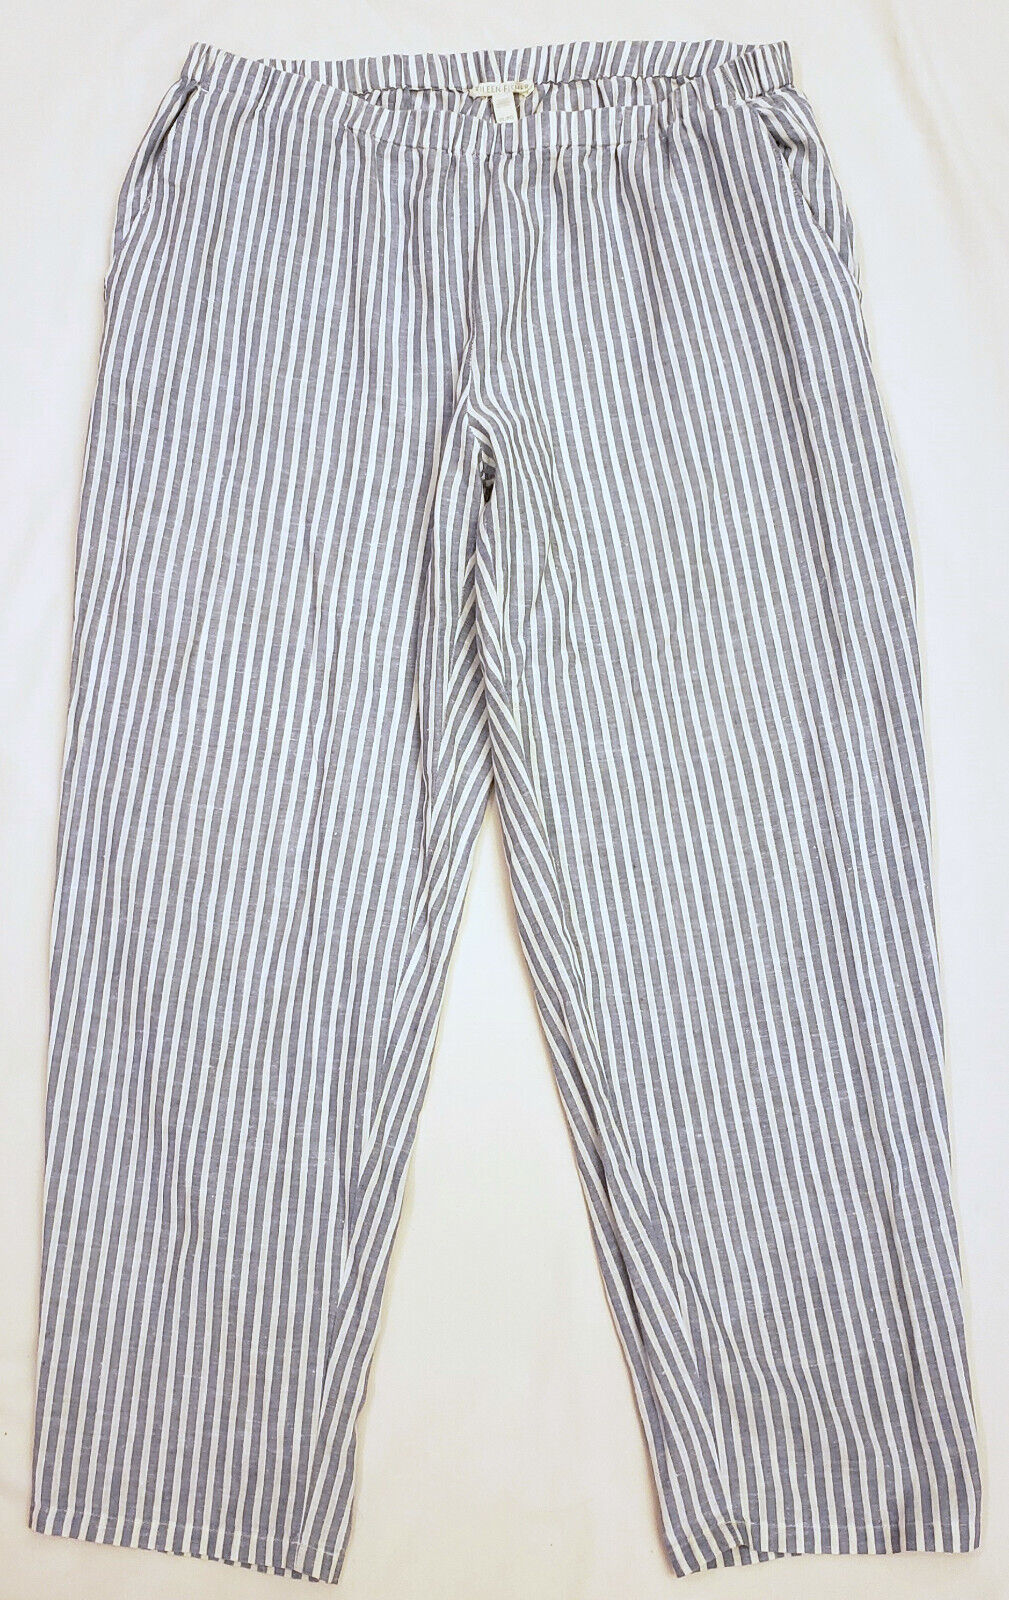 Primary image for Eileen Fisher Comfort Lightweight Tapered Pants Sz-PL Multicolor Stripe